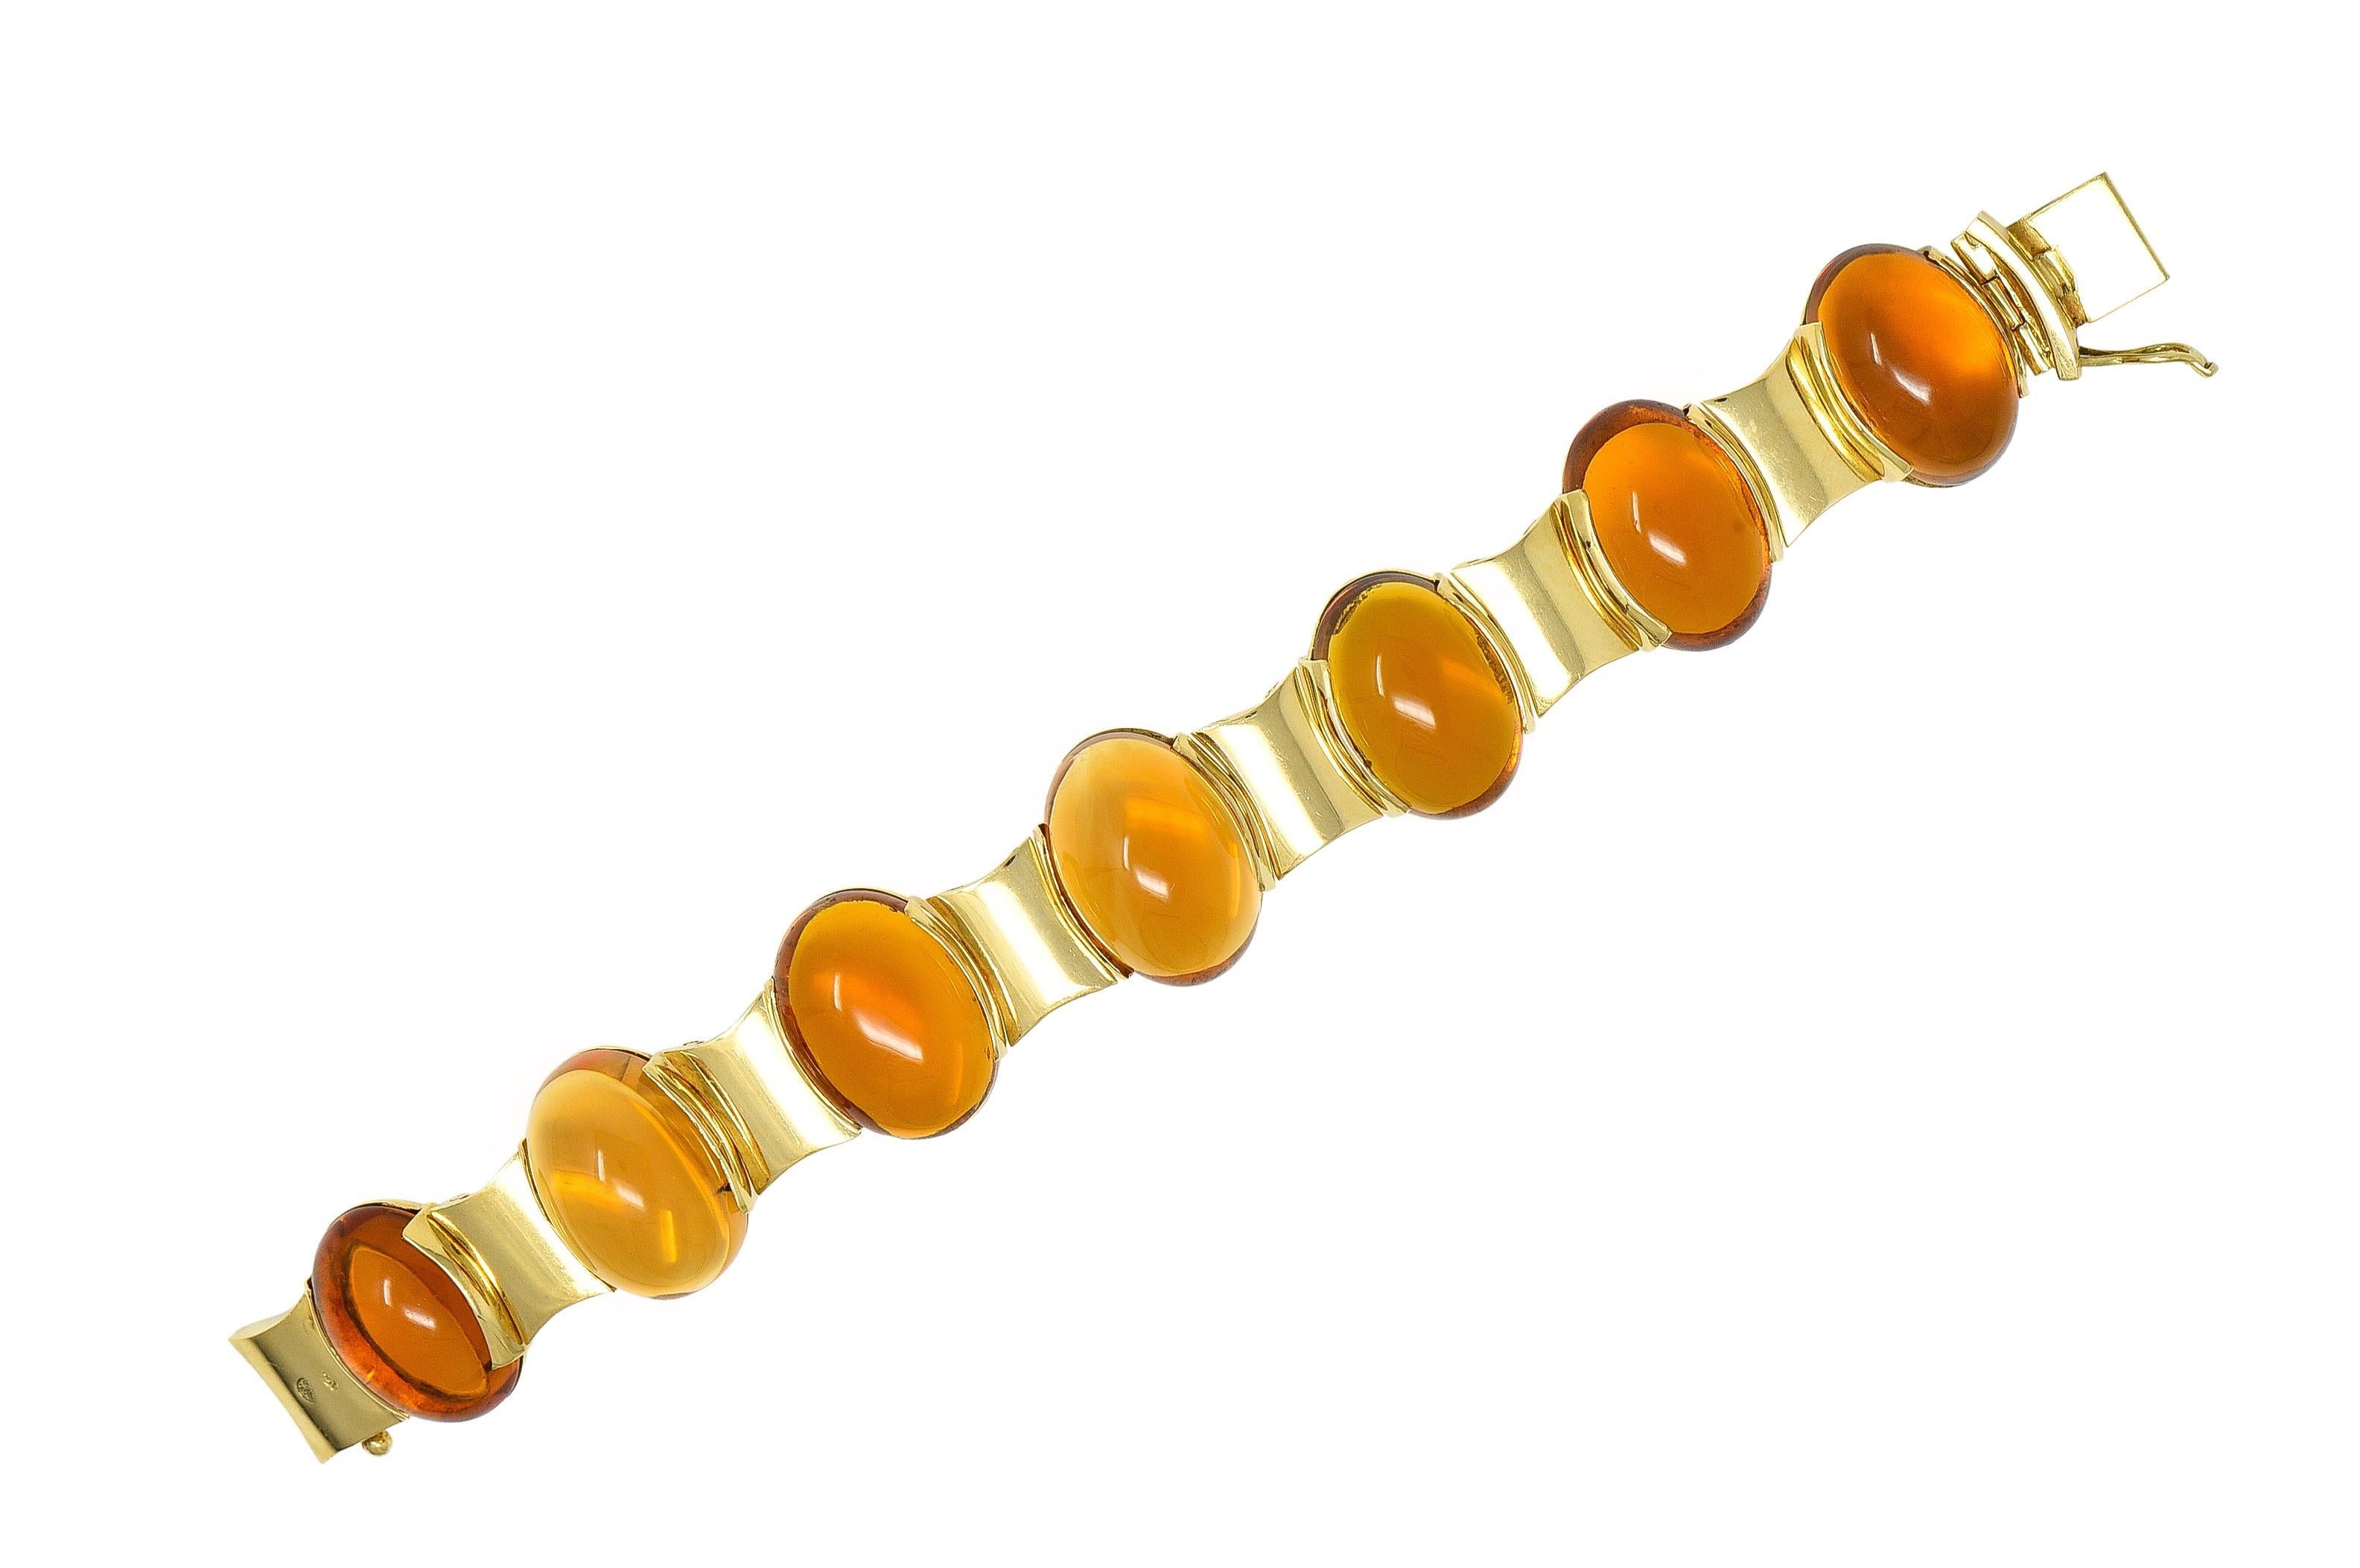 Featuring seven oval-shaped citrine cabochons set in semi-bezel hinged links
Measuring 15.0 x 20.0 mm - transparent medium brownish orange in color 
Alternating with gold geometric curved links 
Completed by concealed clasp closure
With hinged